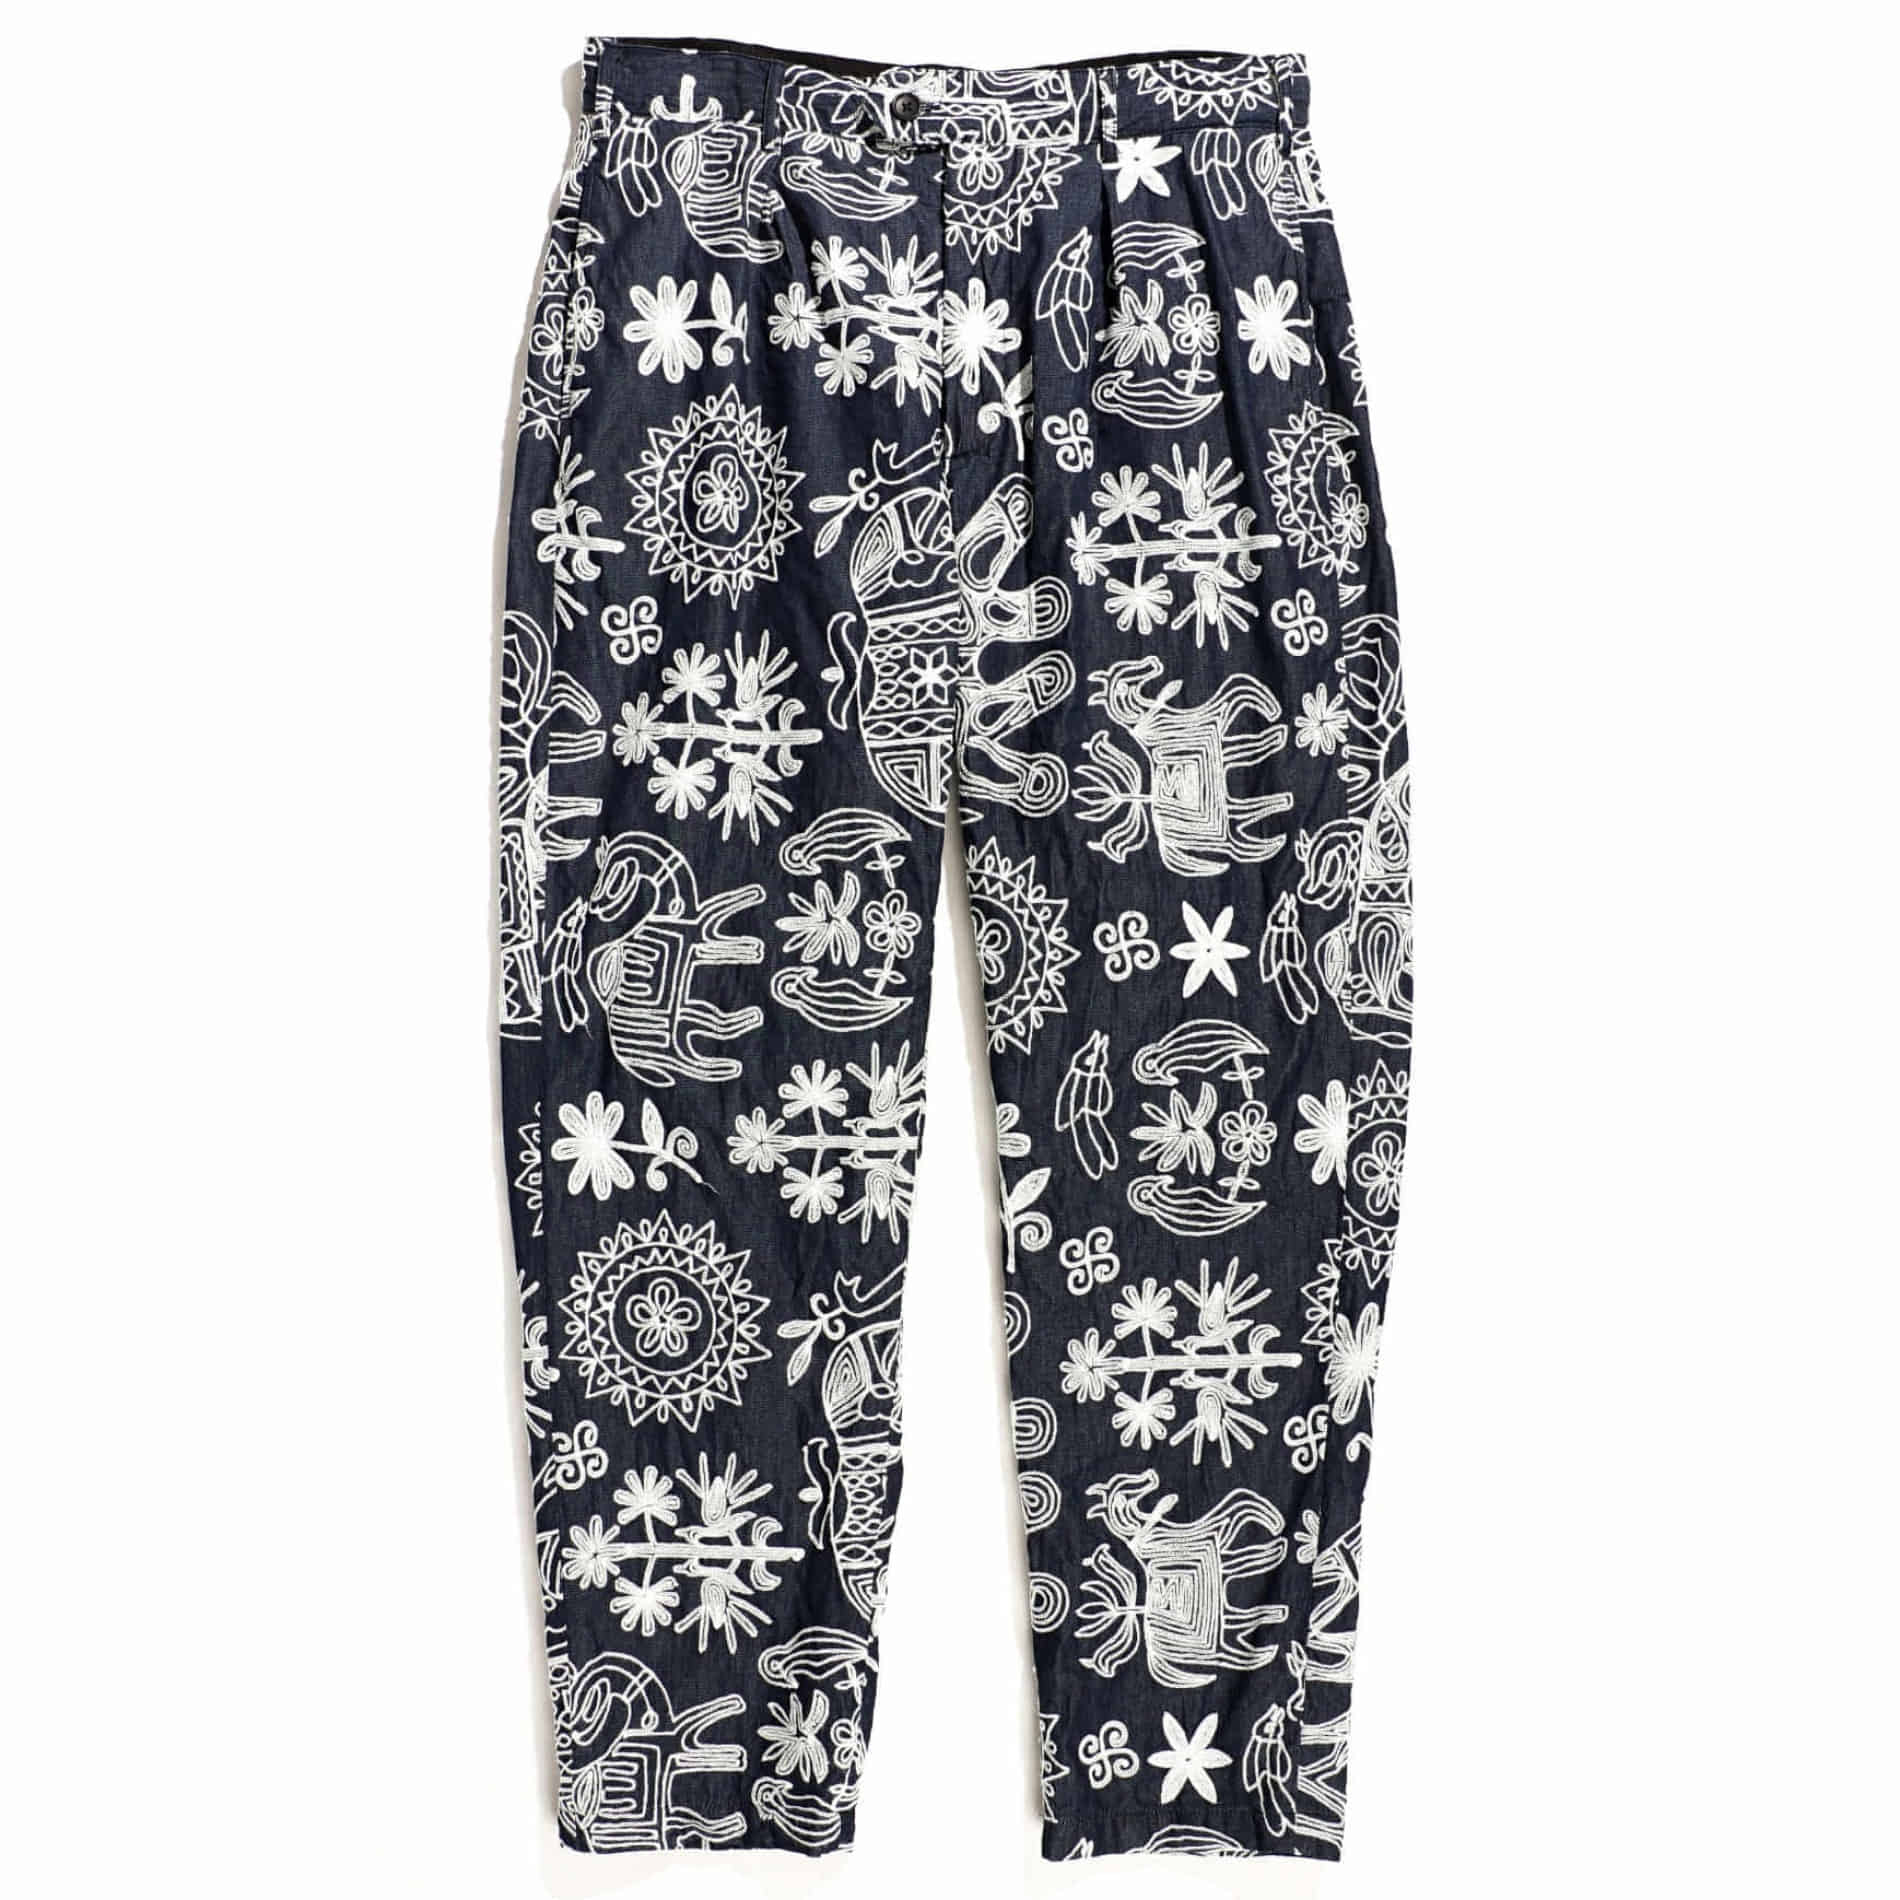 ENGINEERED GARMENTS CARLYLE PANT INDIGO FLORAL EMBROIDERY DENIM